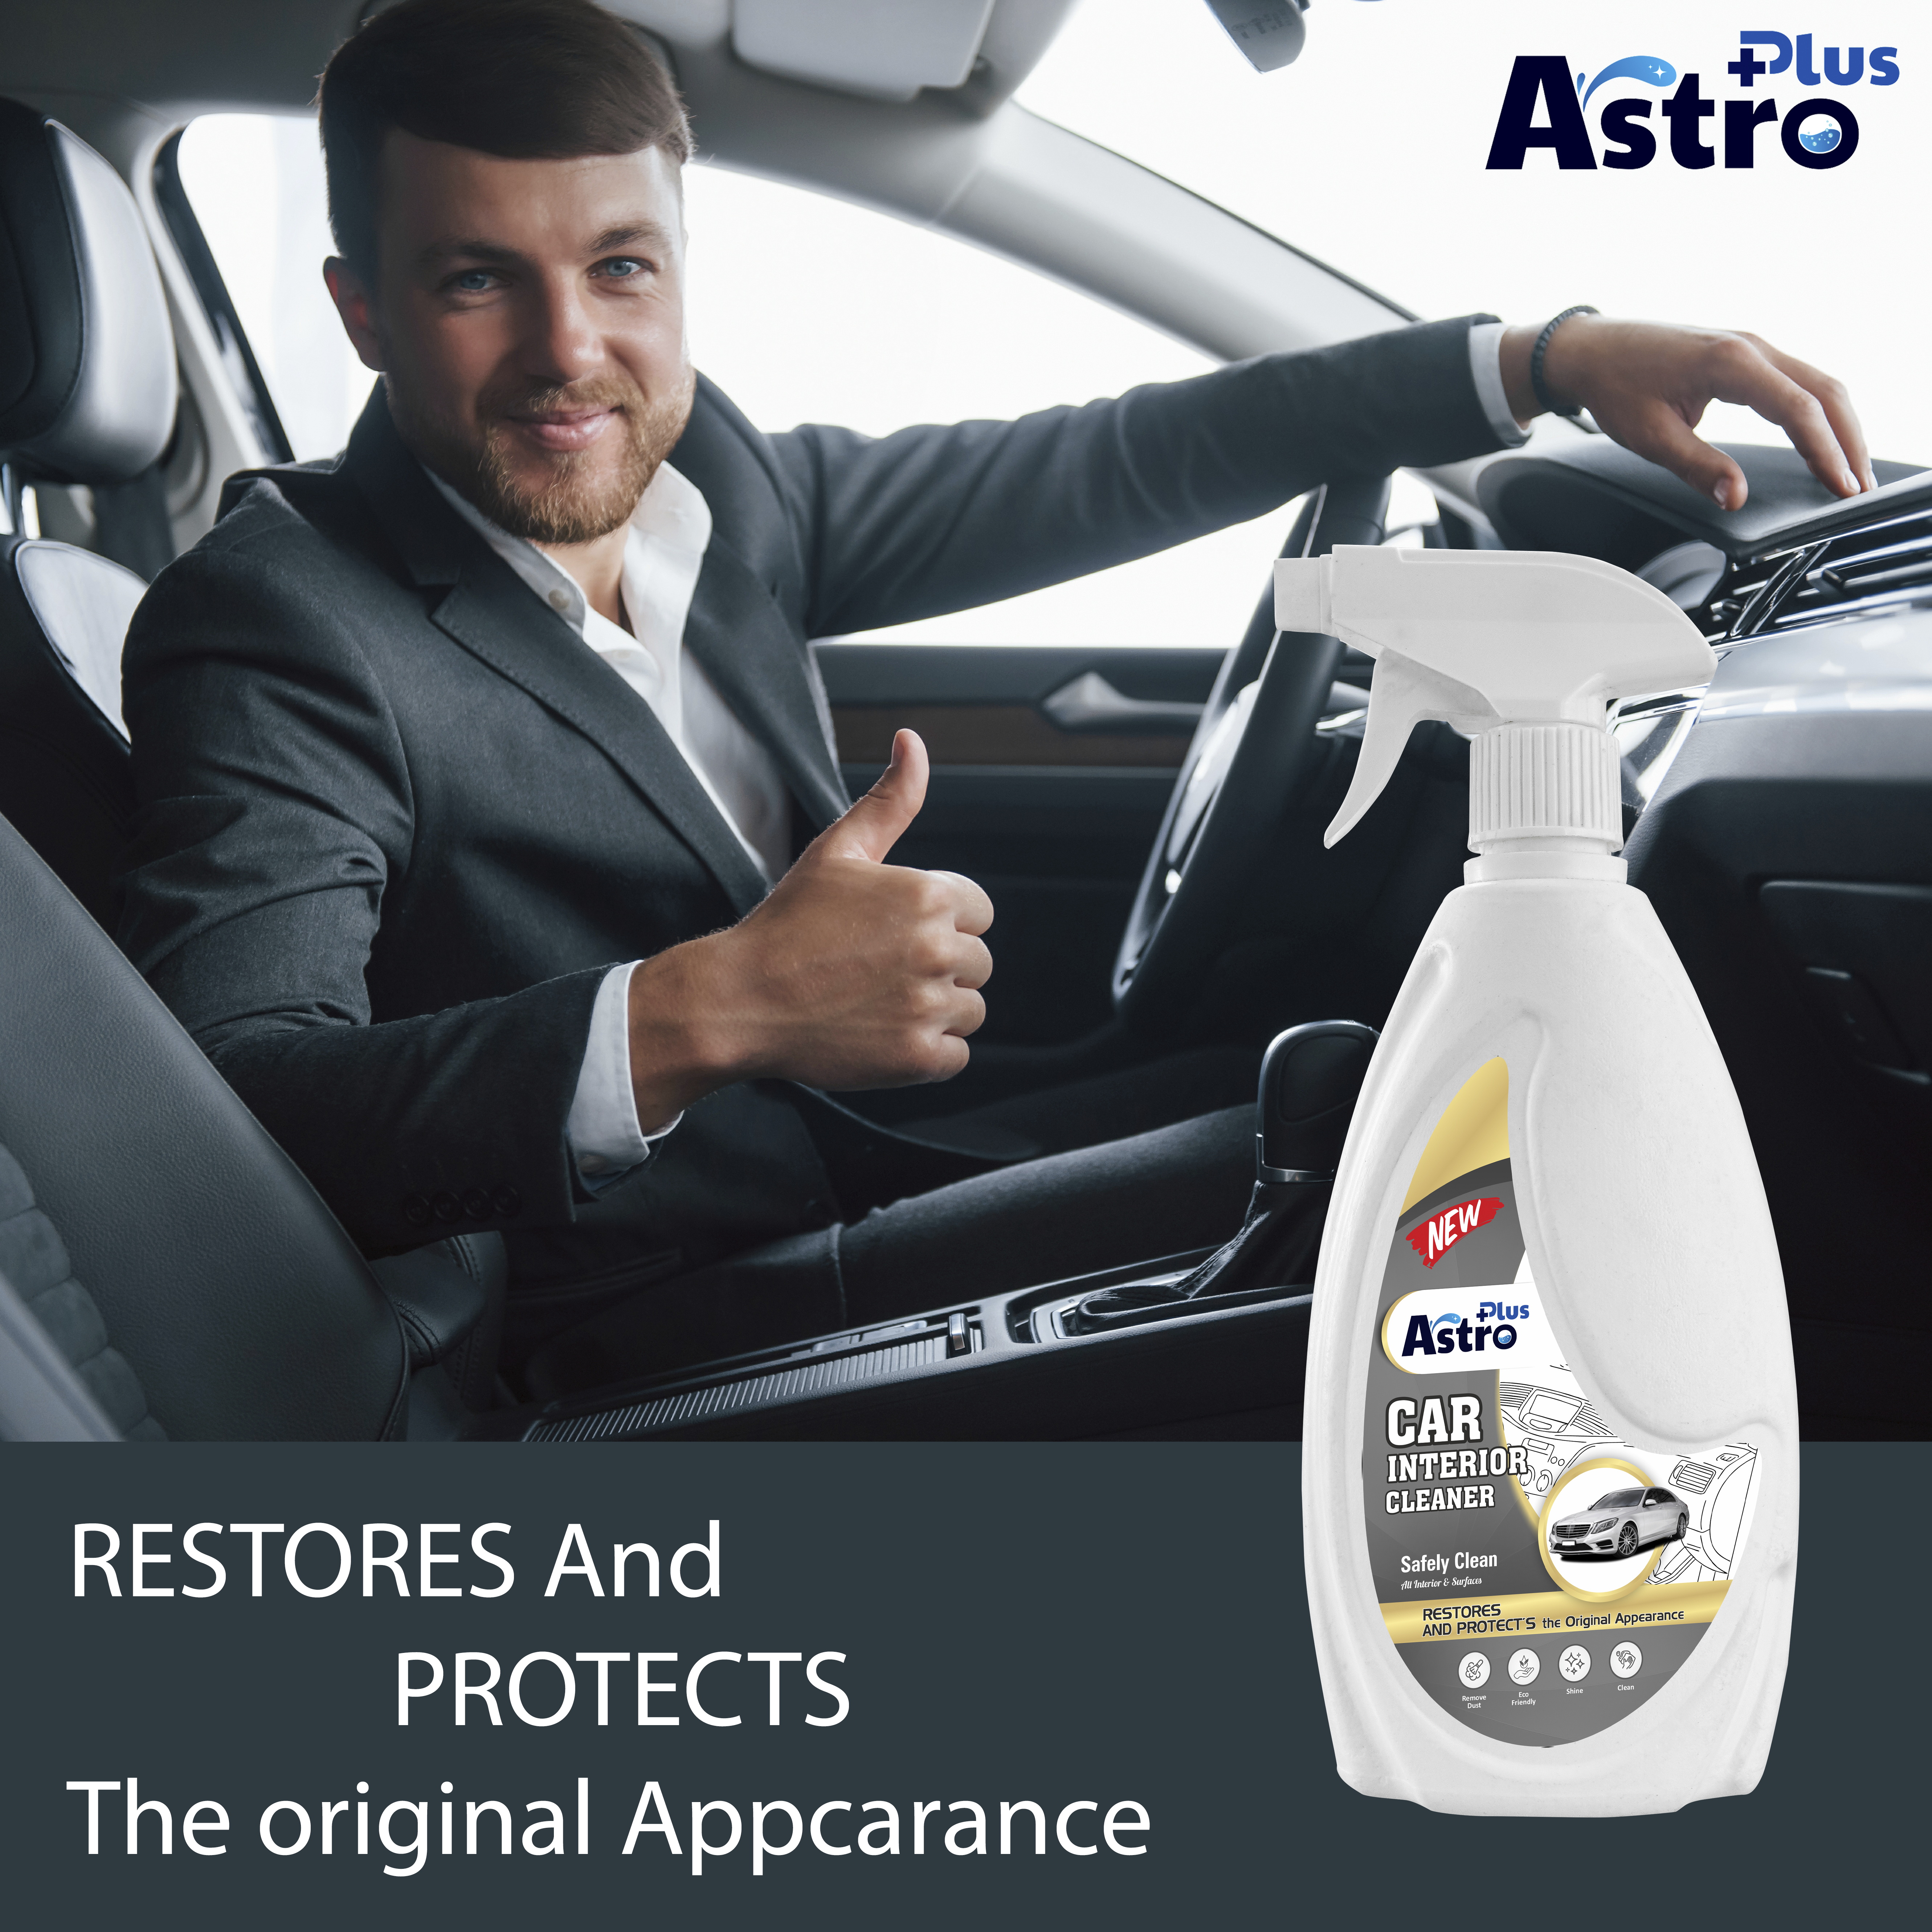 ASTRO PLUS+ Astro Plus+ stain Remover liquid - 200 G, Eco Friendly, Removes  Hard Water Marks Stain Remover Price in India - Buy ASTRO PLUS+ Astro Plus+  stain Remover liquid - 200 G, Eco Friendly